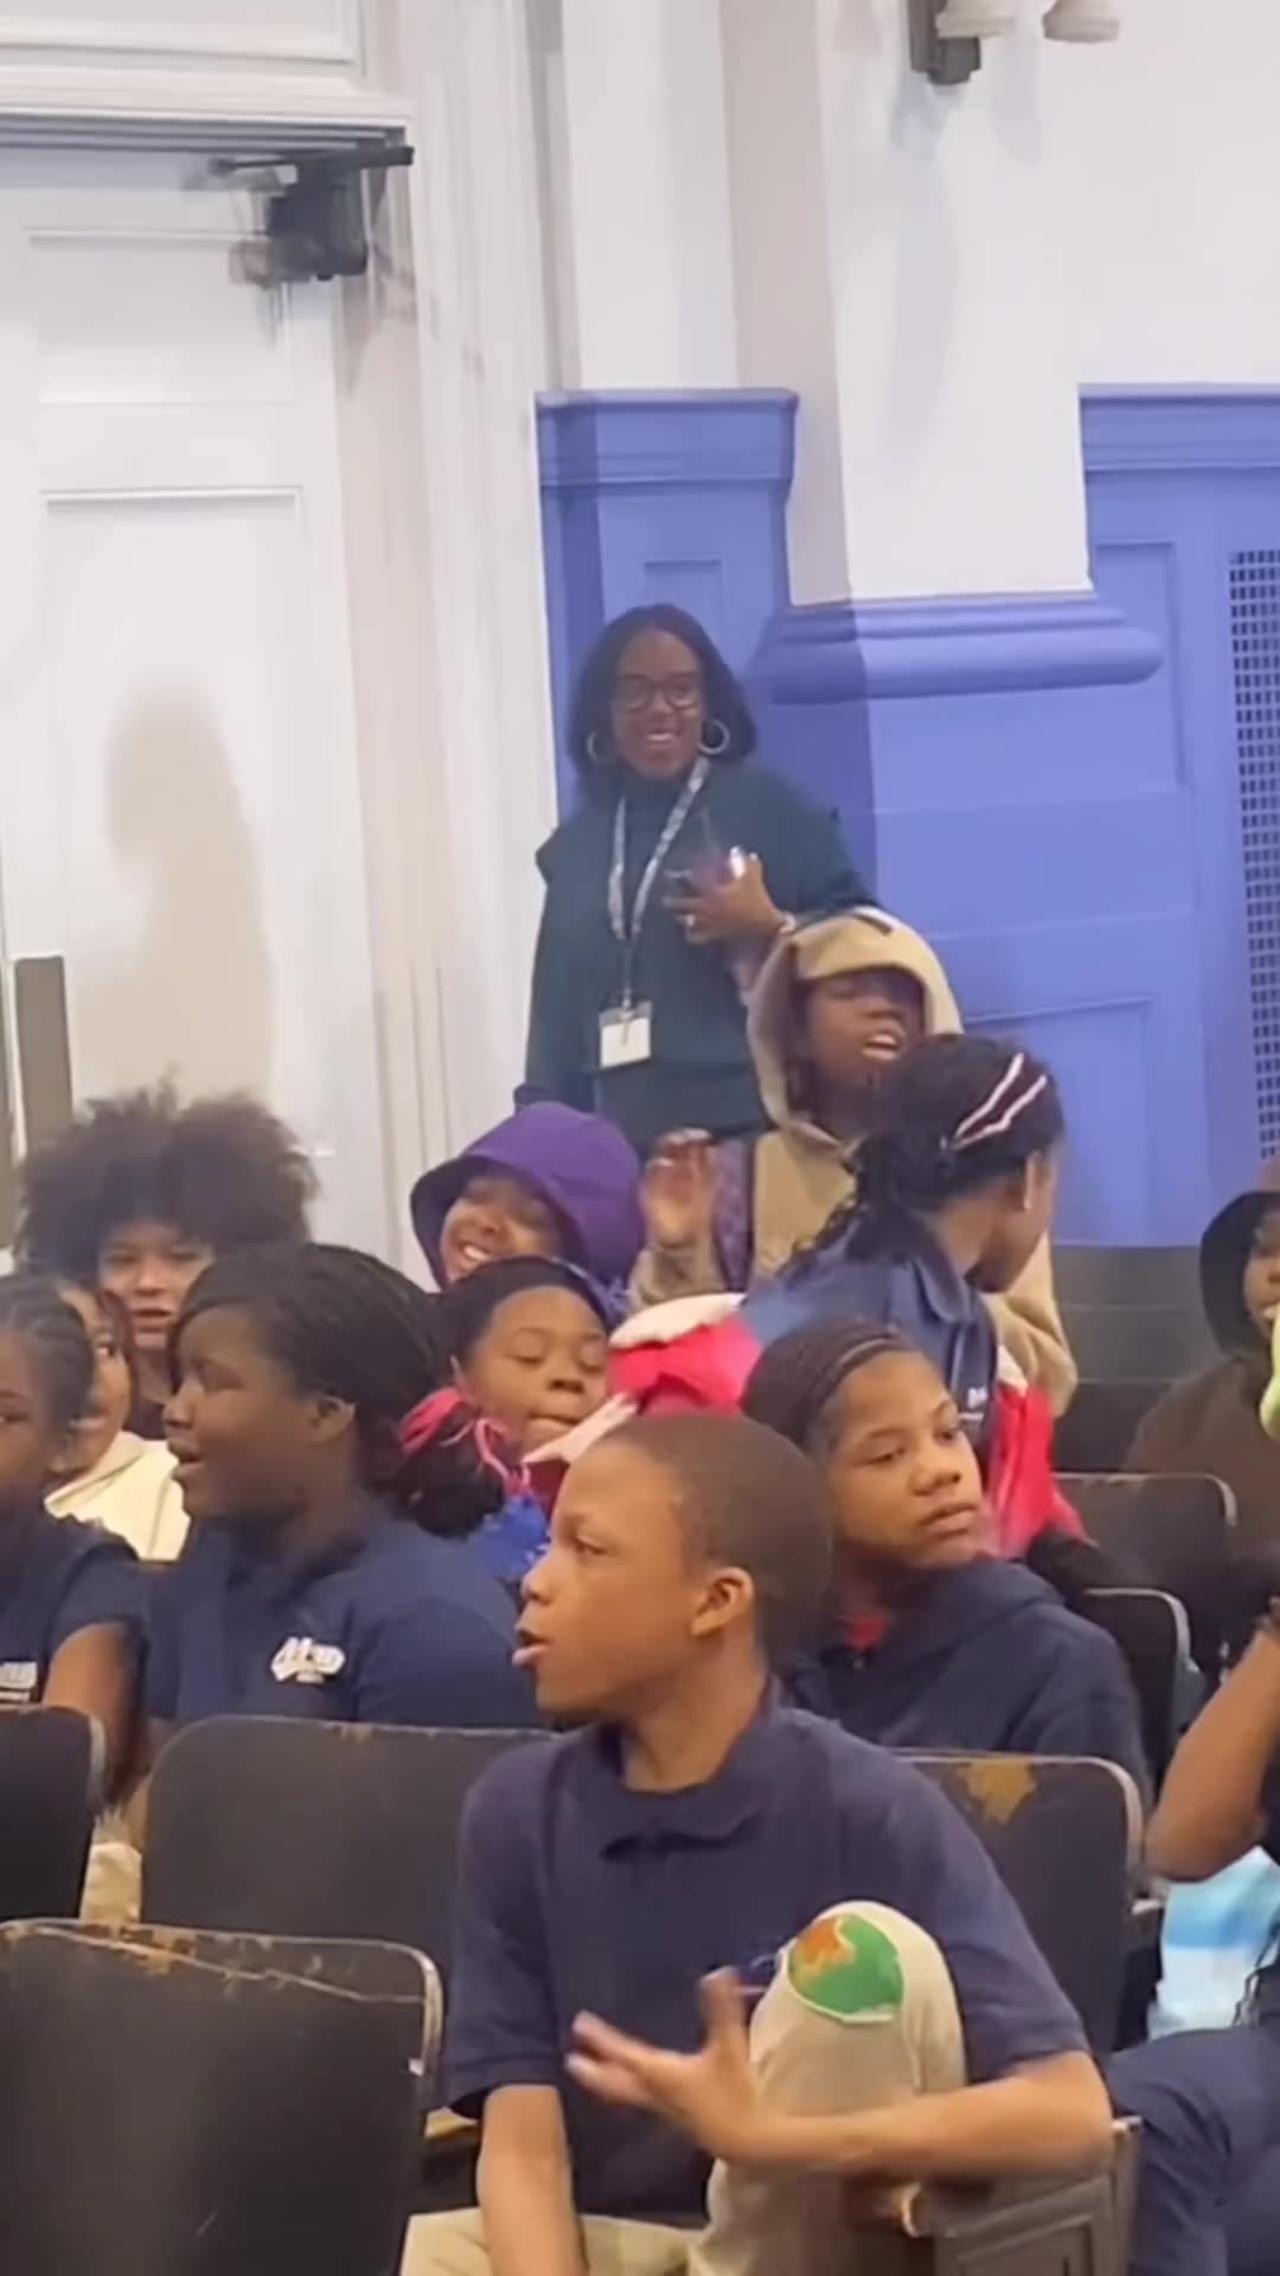 Keyshia Cole got these elementary school kids singing their hearts out